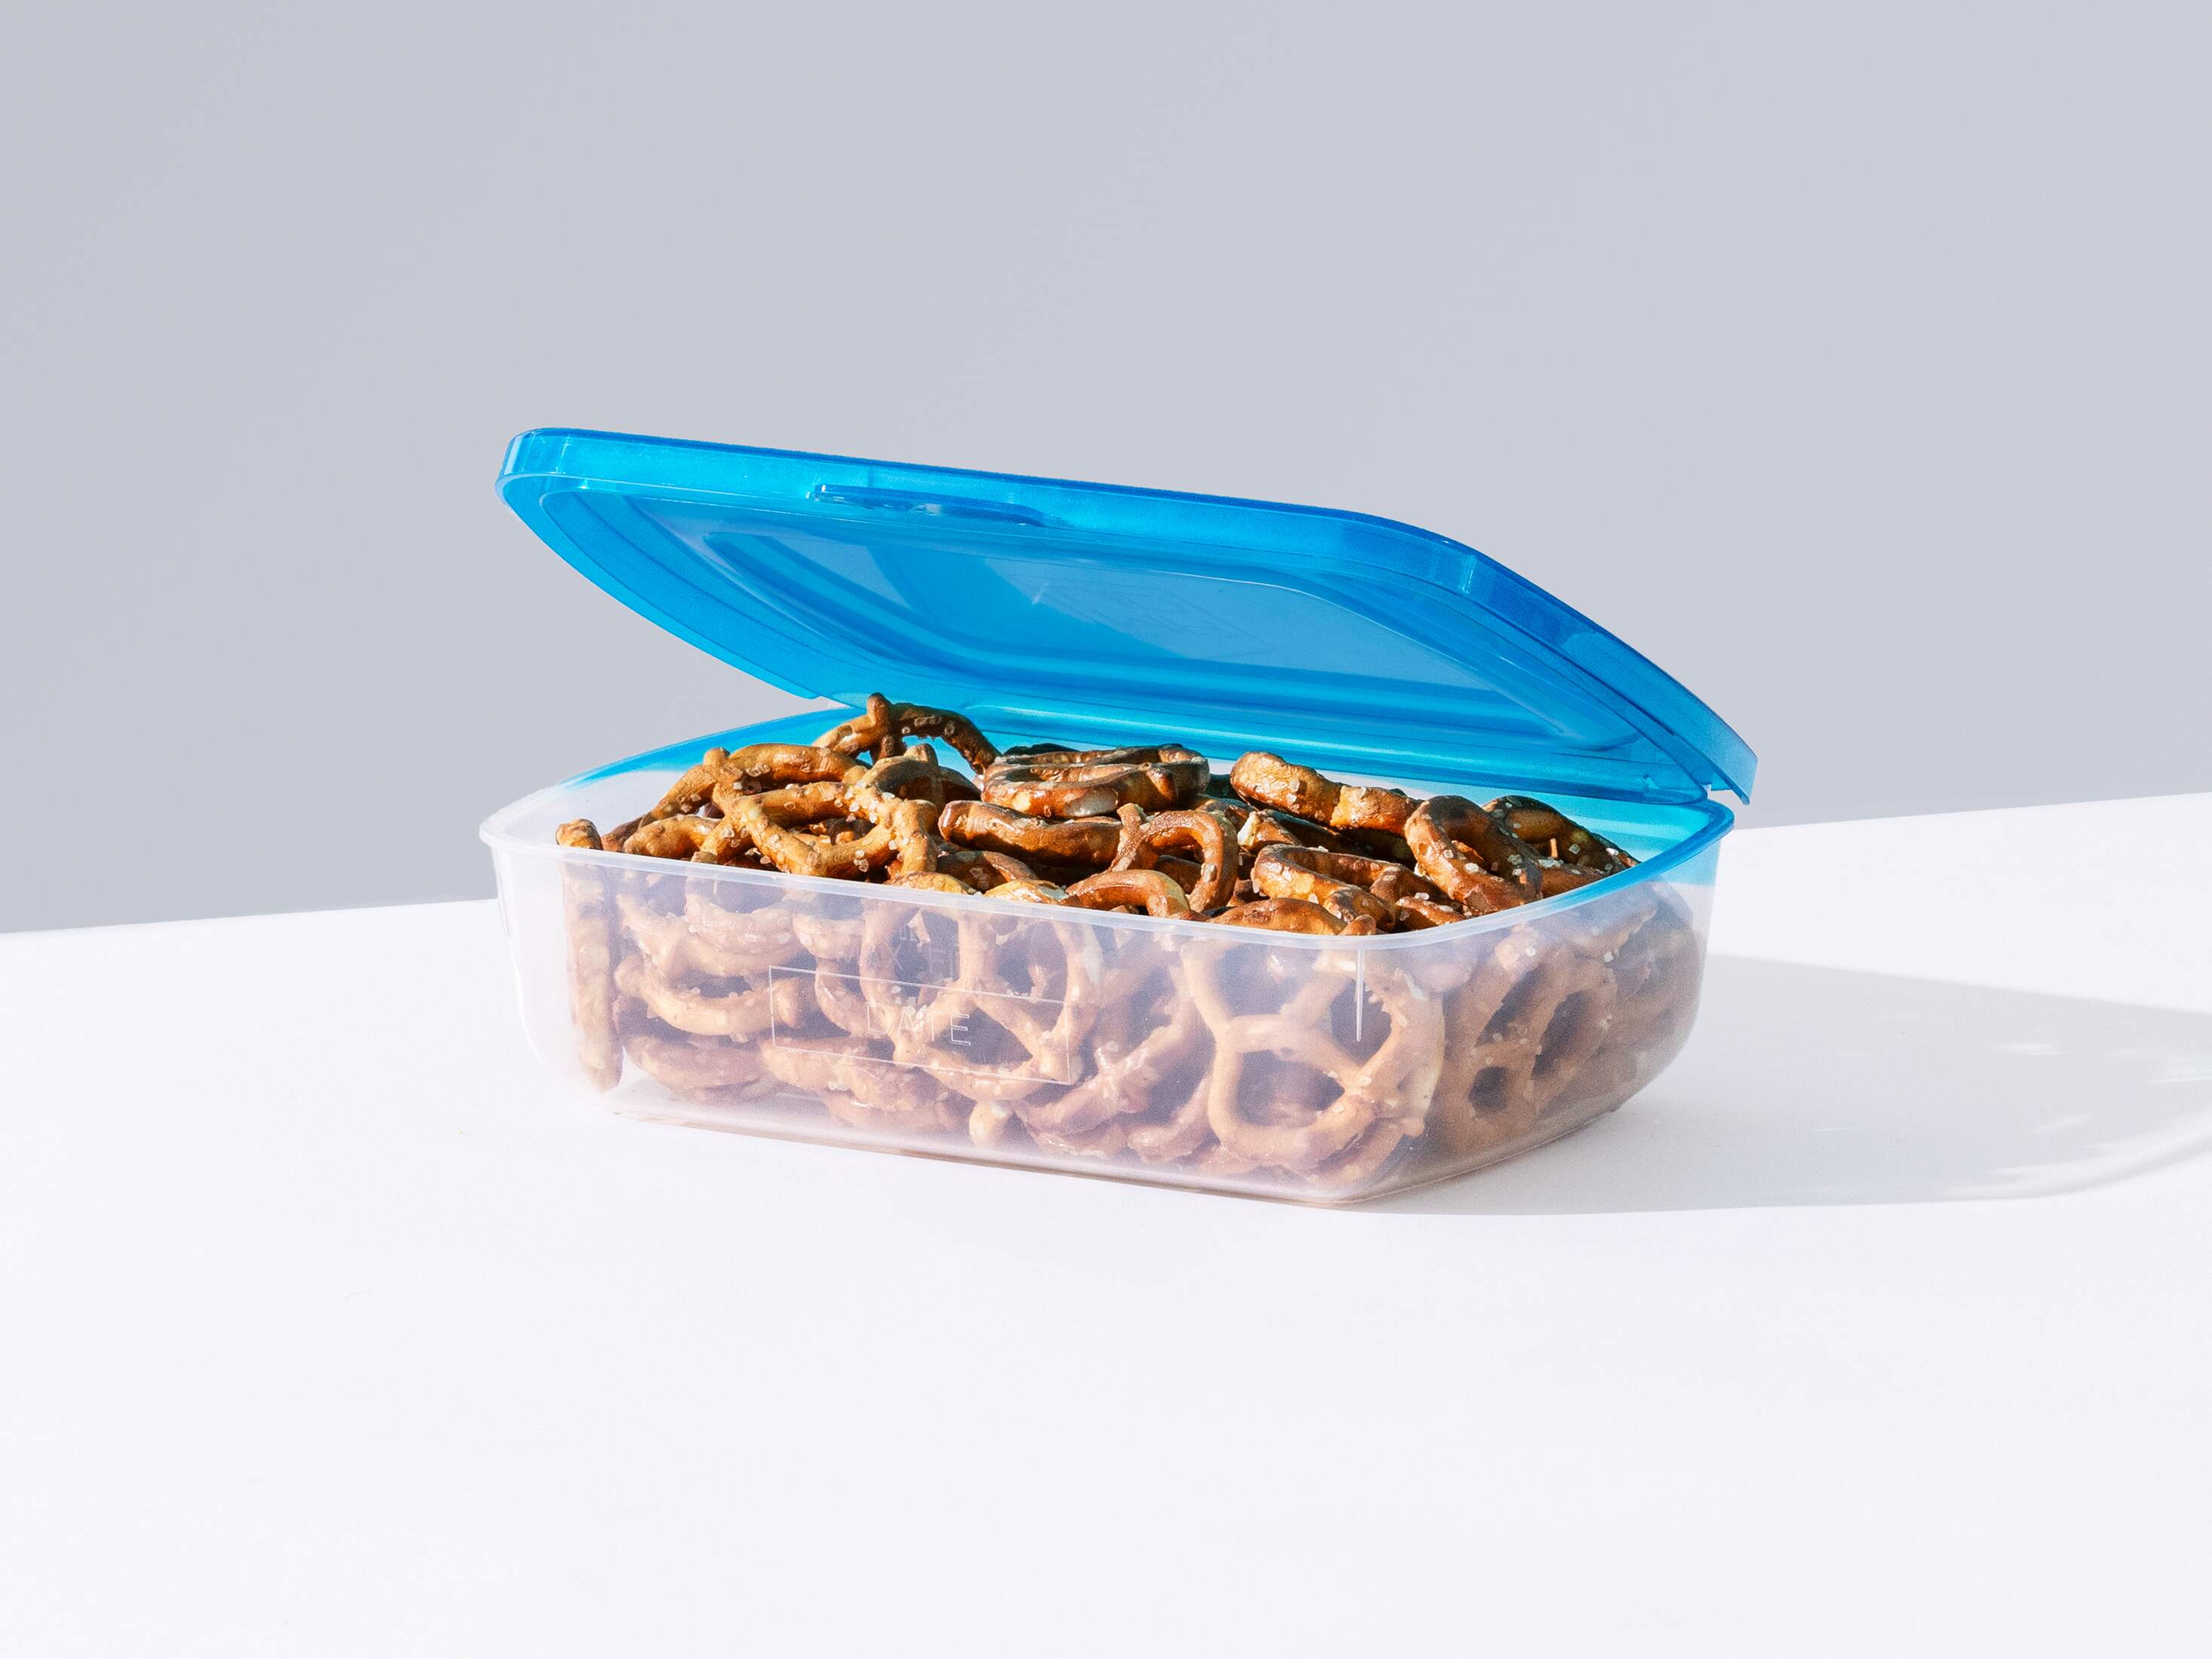 Mr. Lid - The Lid's attached!  Plastic Food Storage Container!